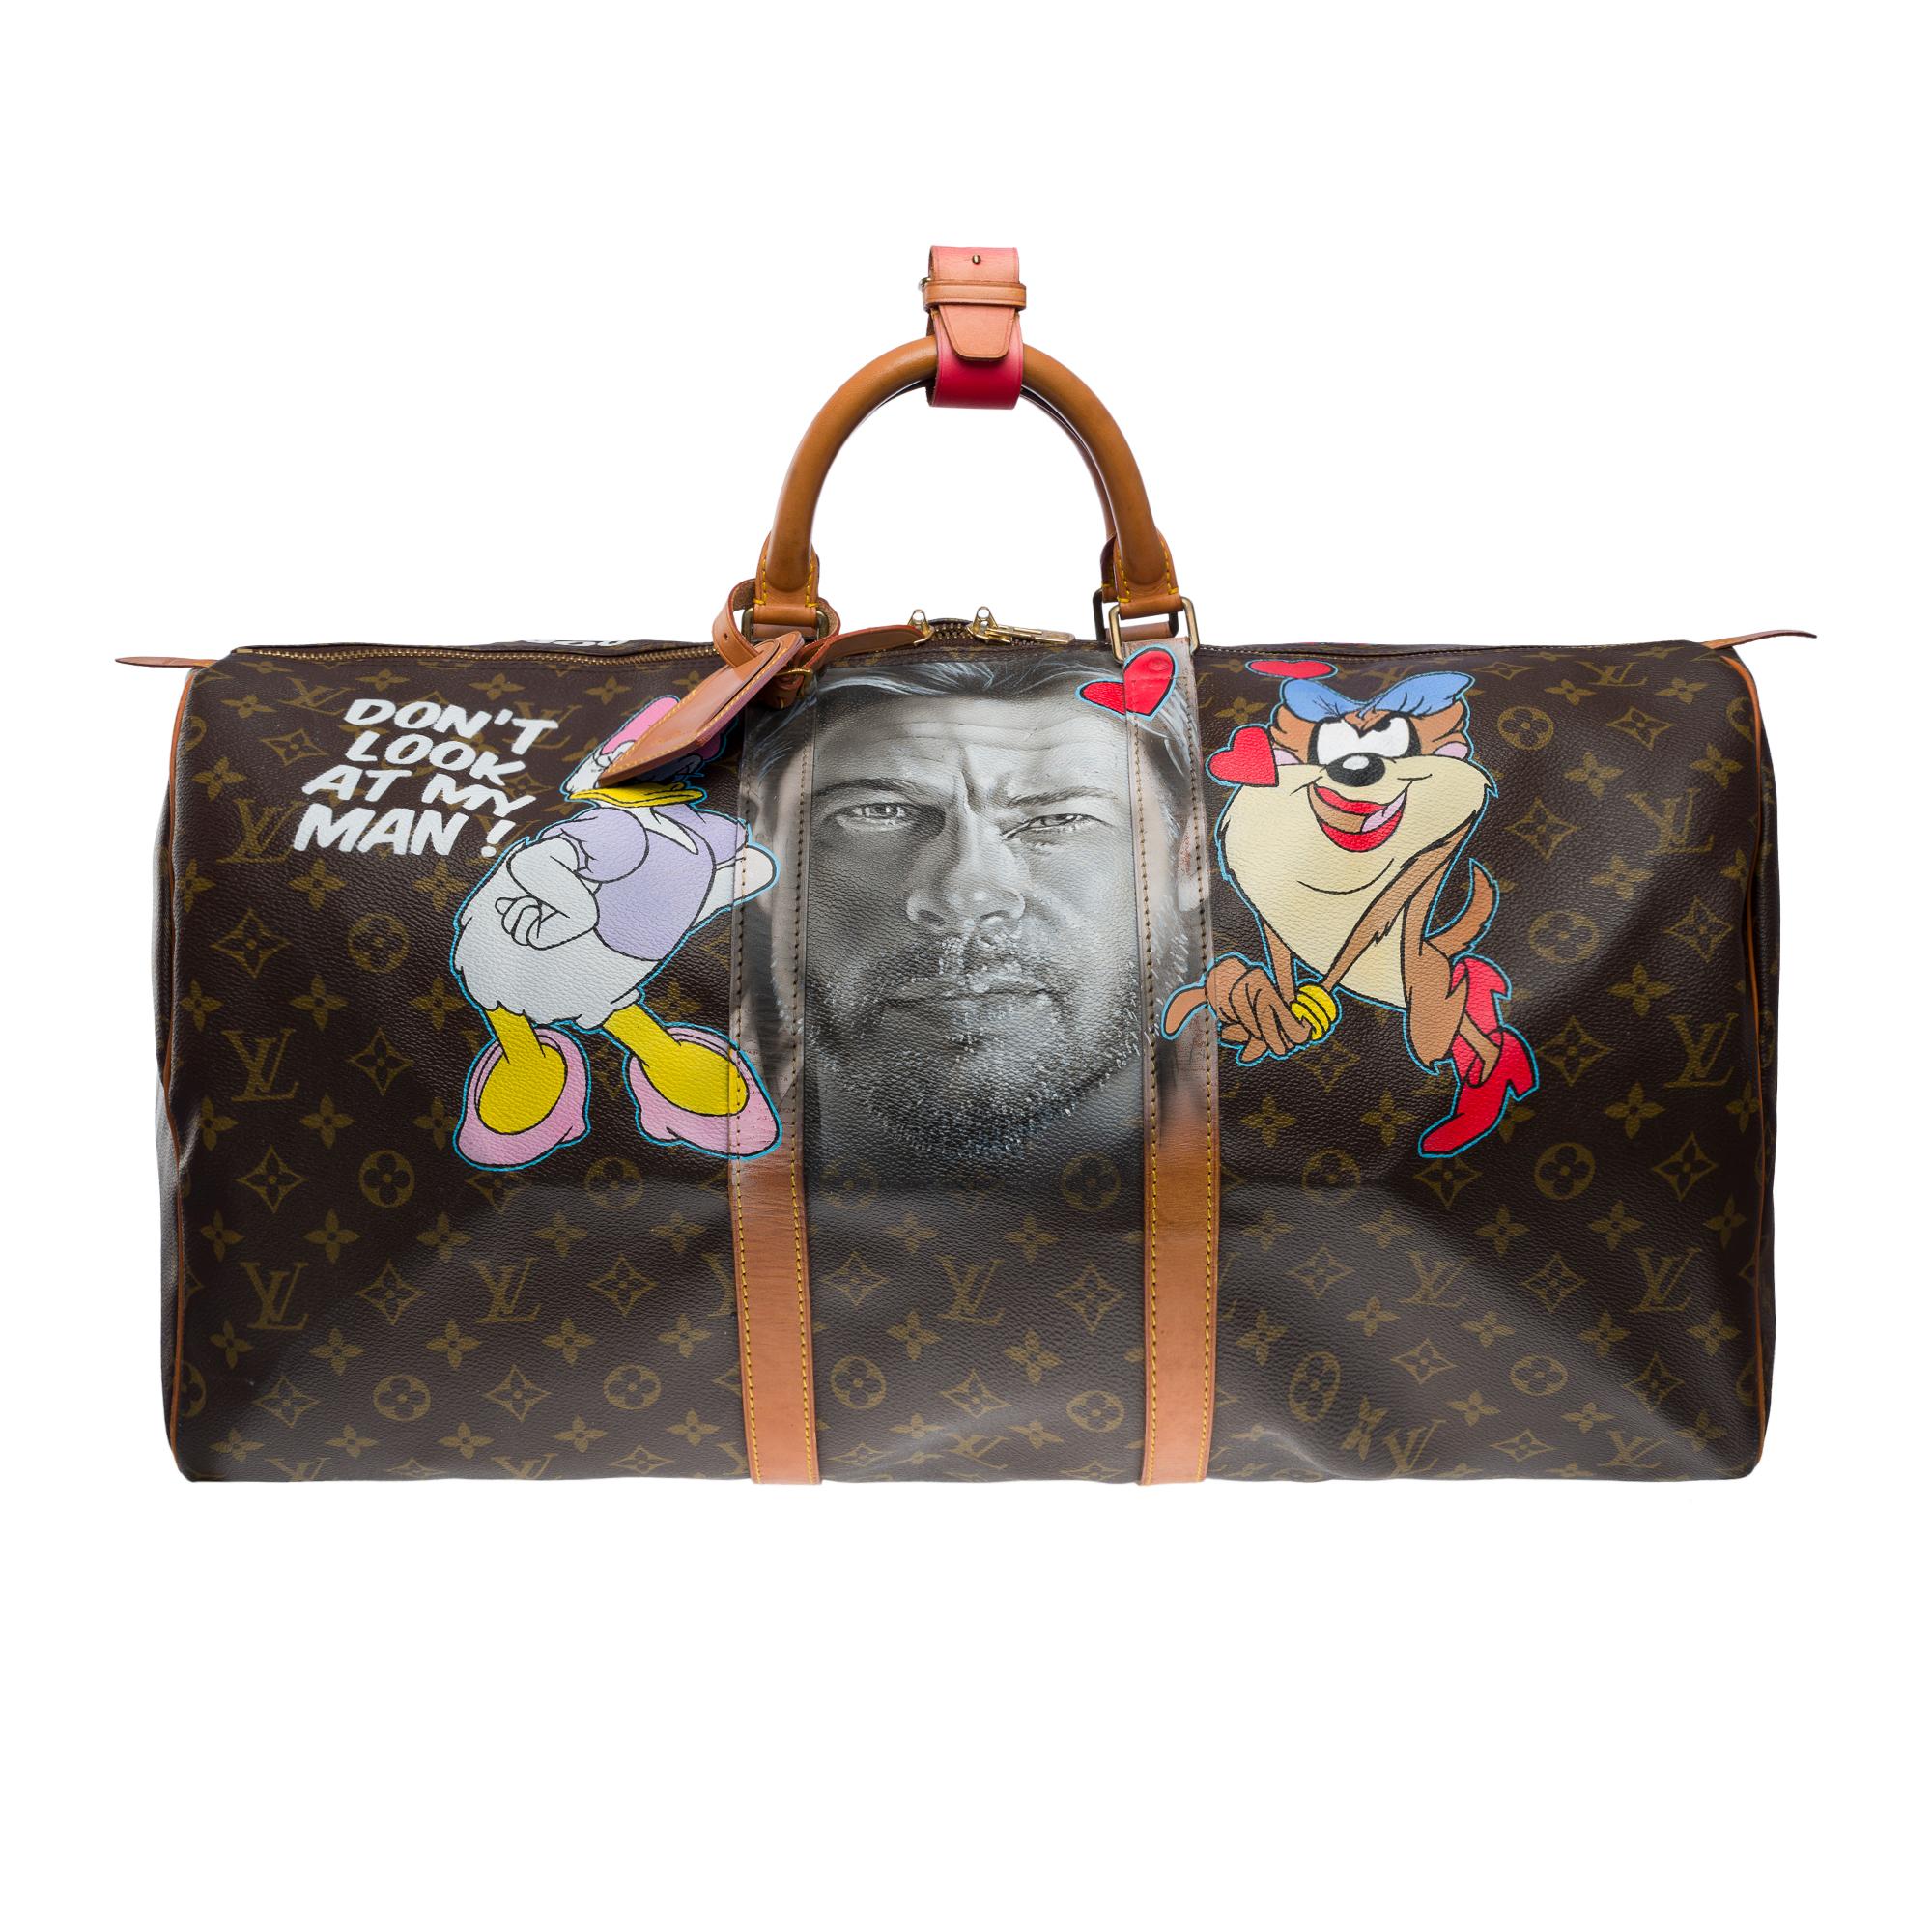 Amazing Louis Vuitton Keepall 55 Travel bag in brown monogram canvas customized by the fashionable artist of Street Art PatBo 